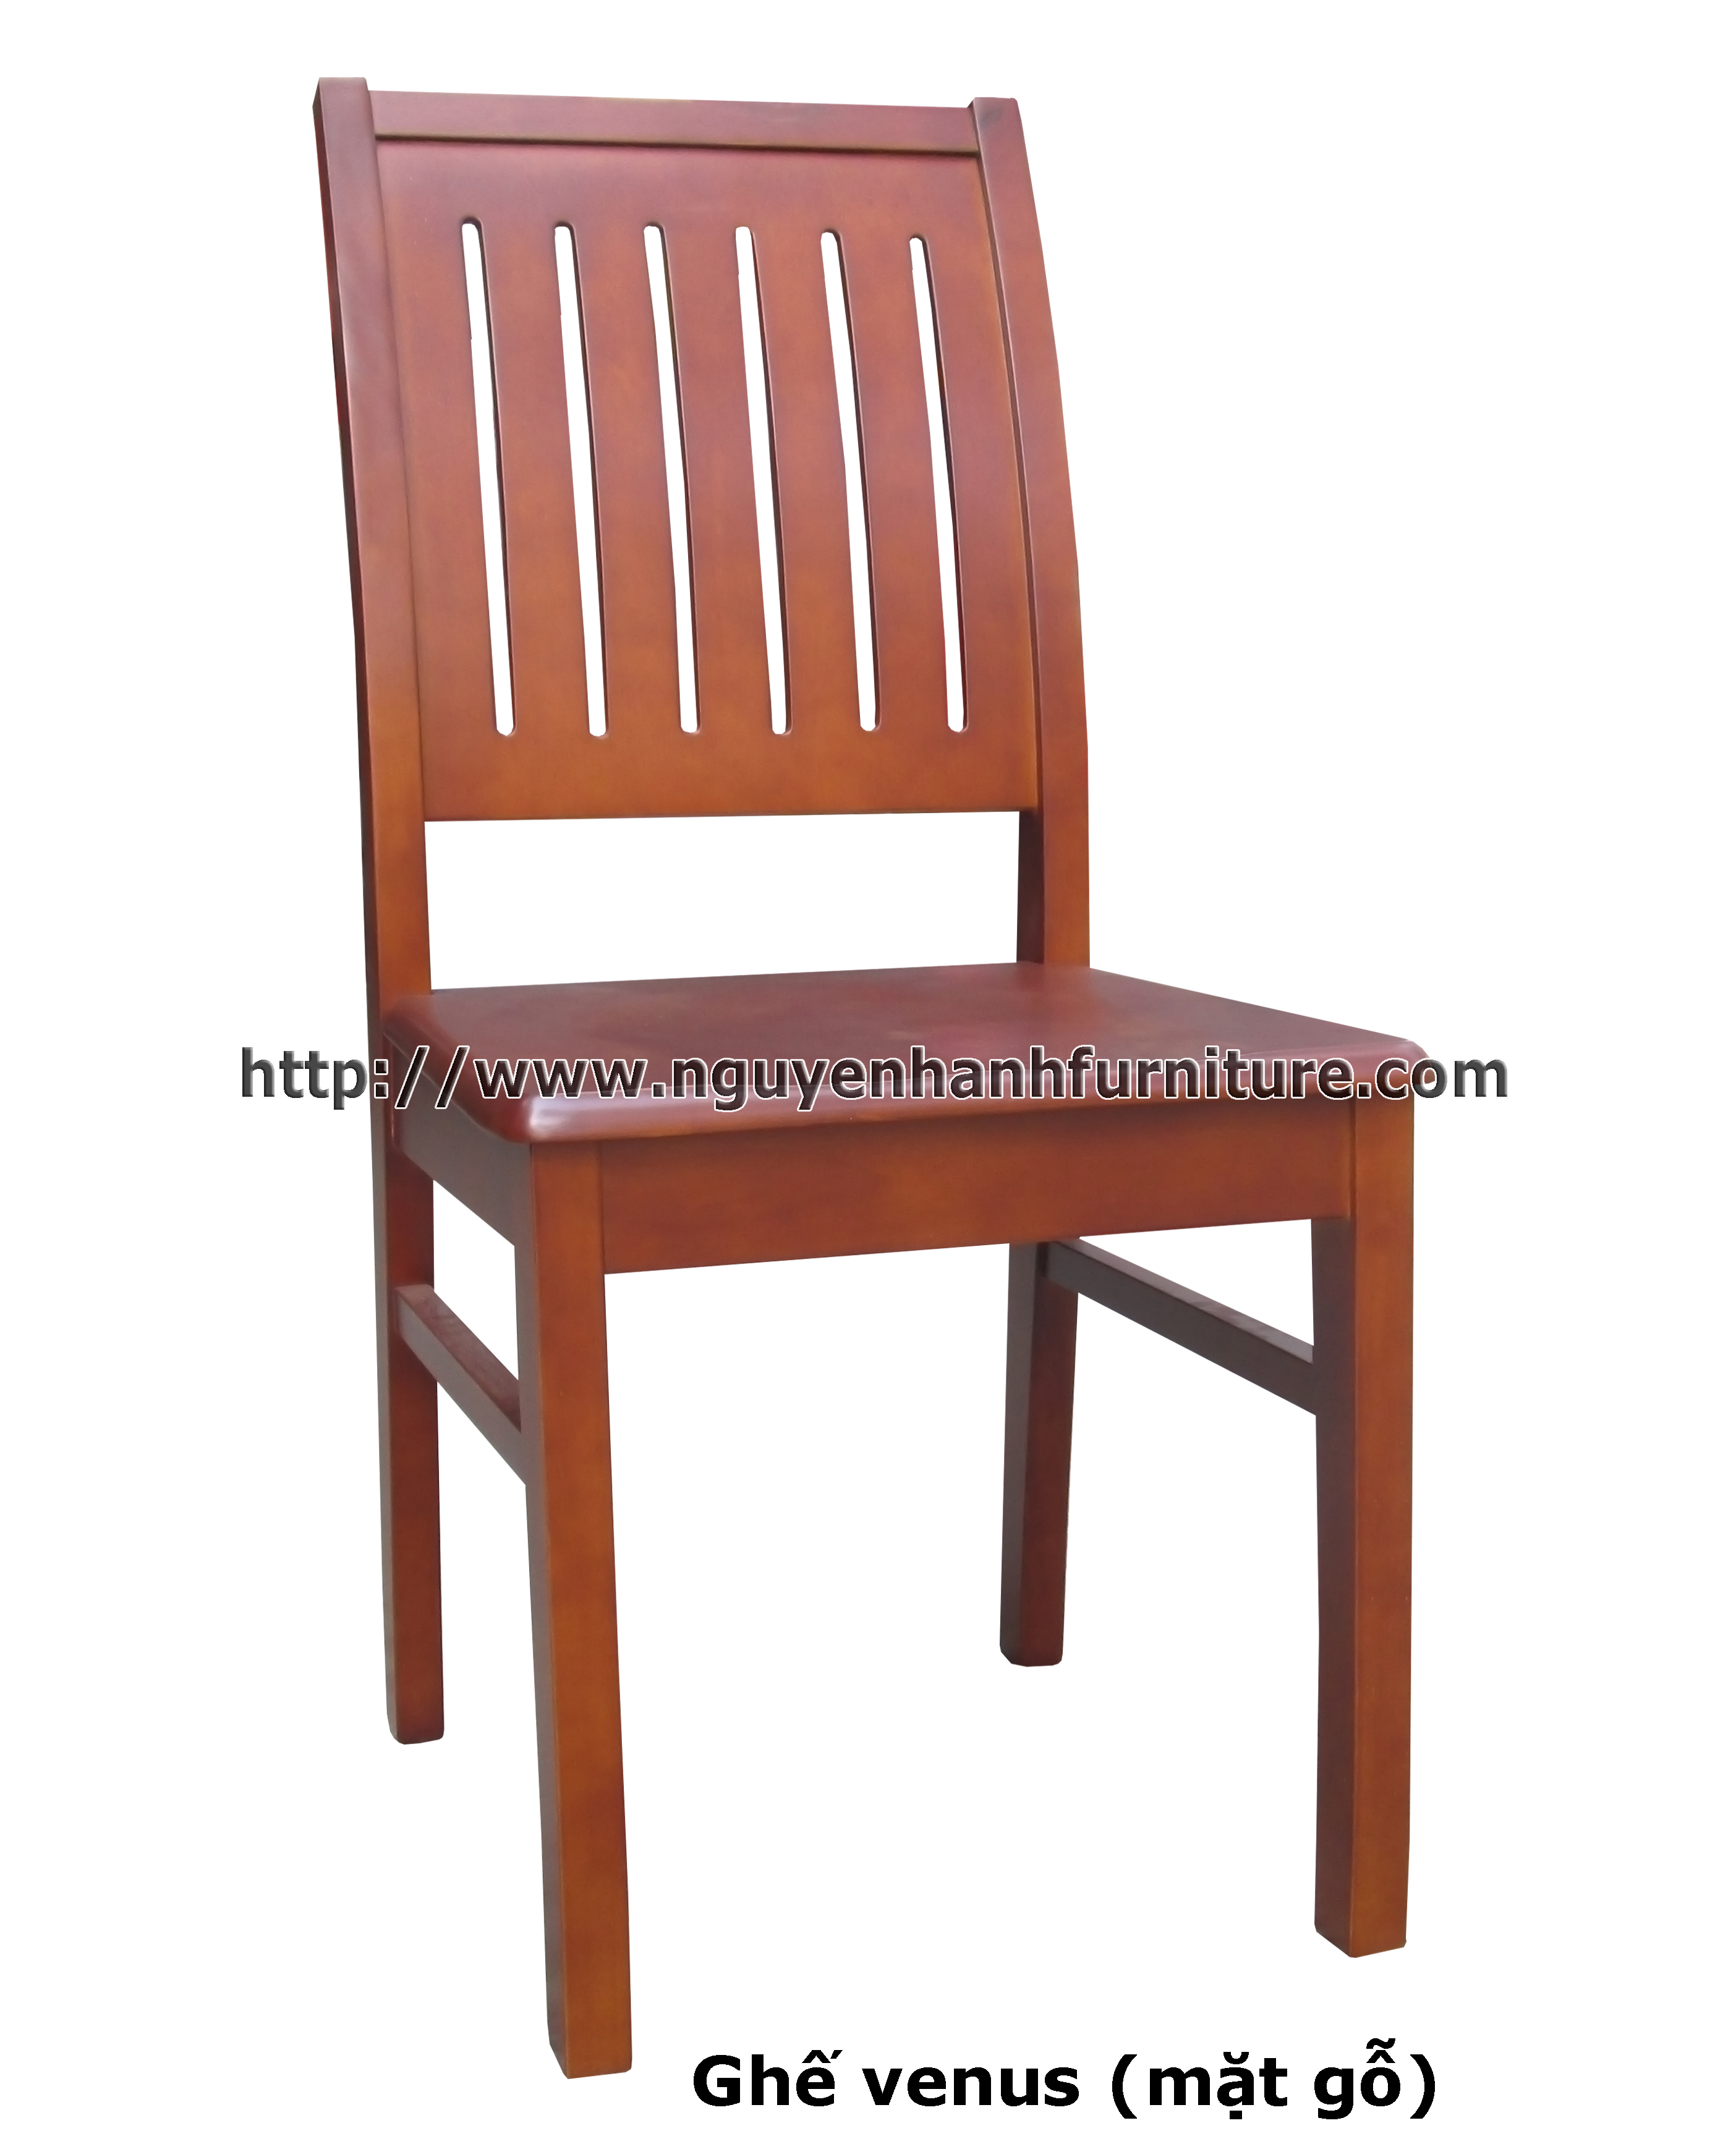 Name product: Venus chair (Red) - Dimensions: - Description:  Wood natural rubber